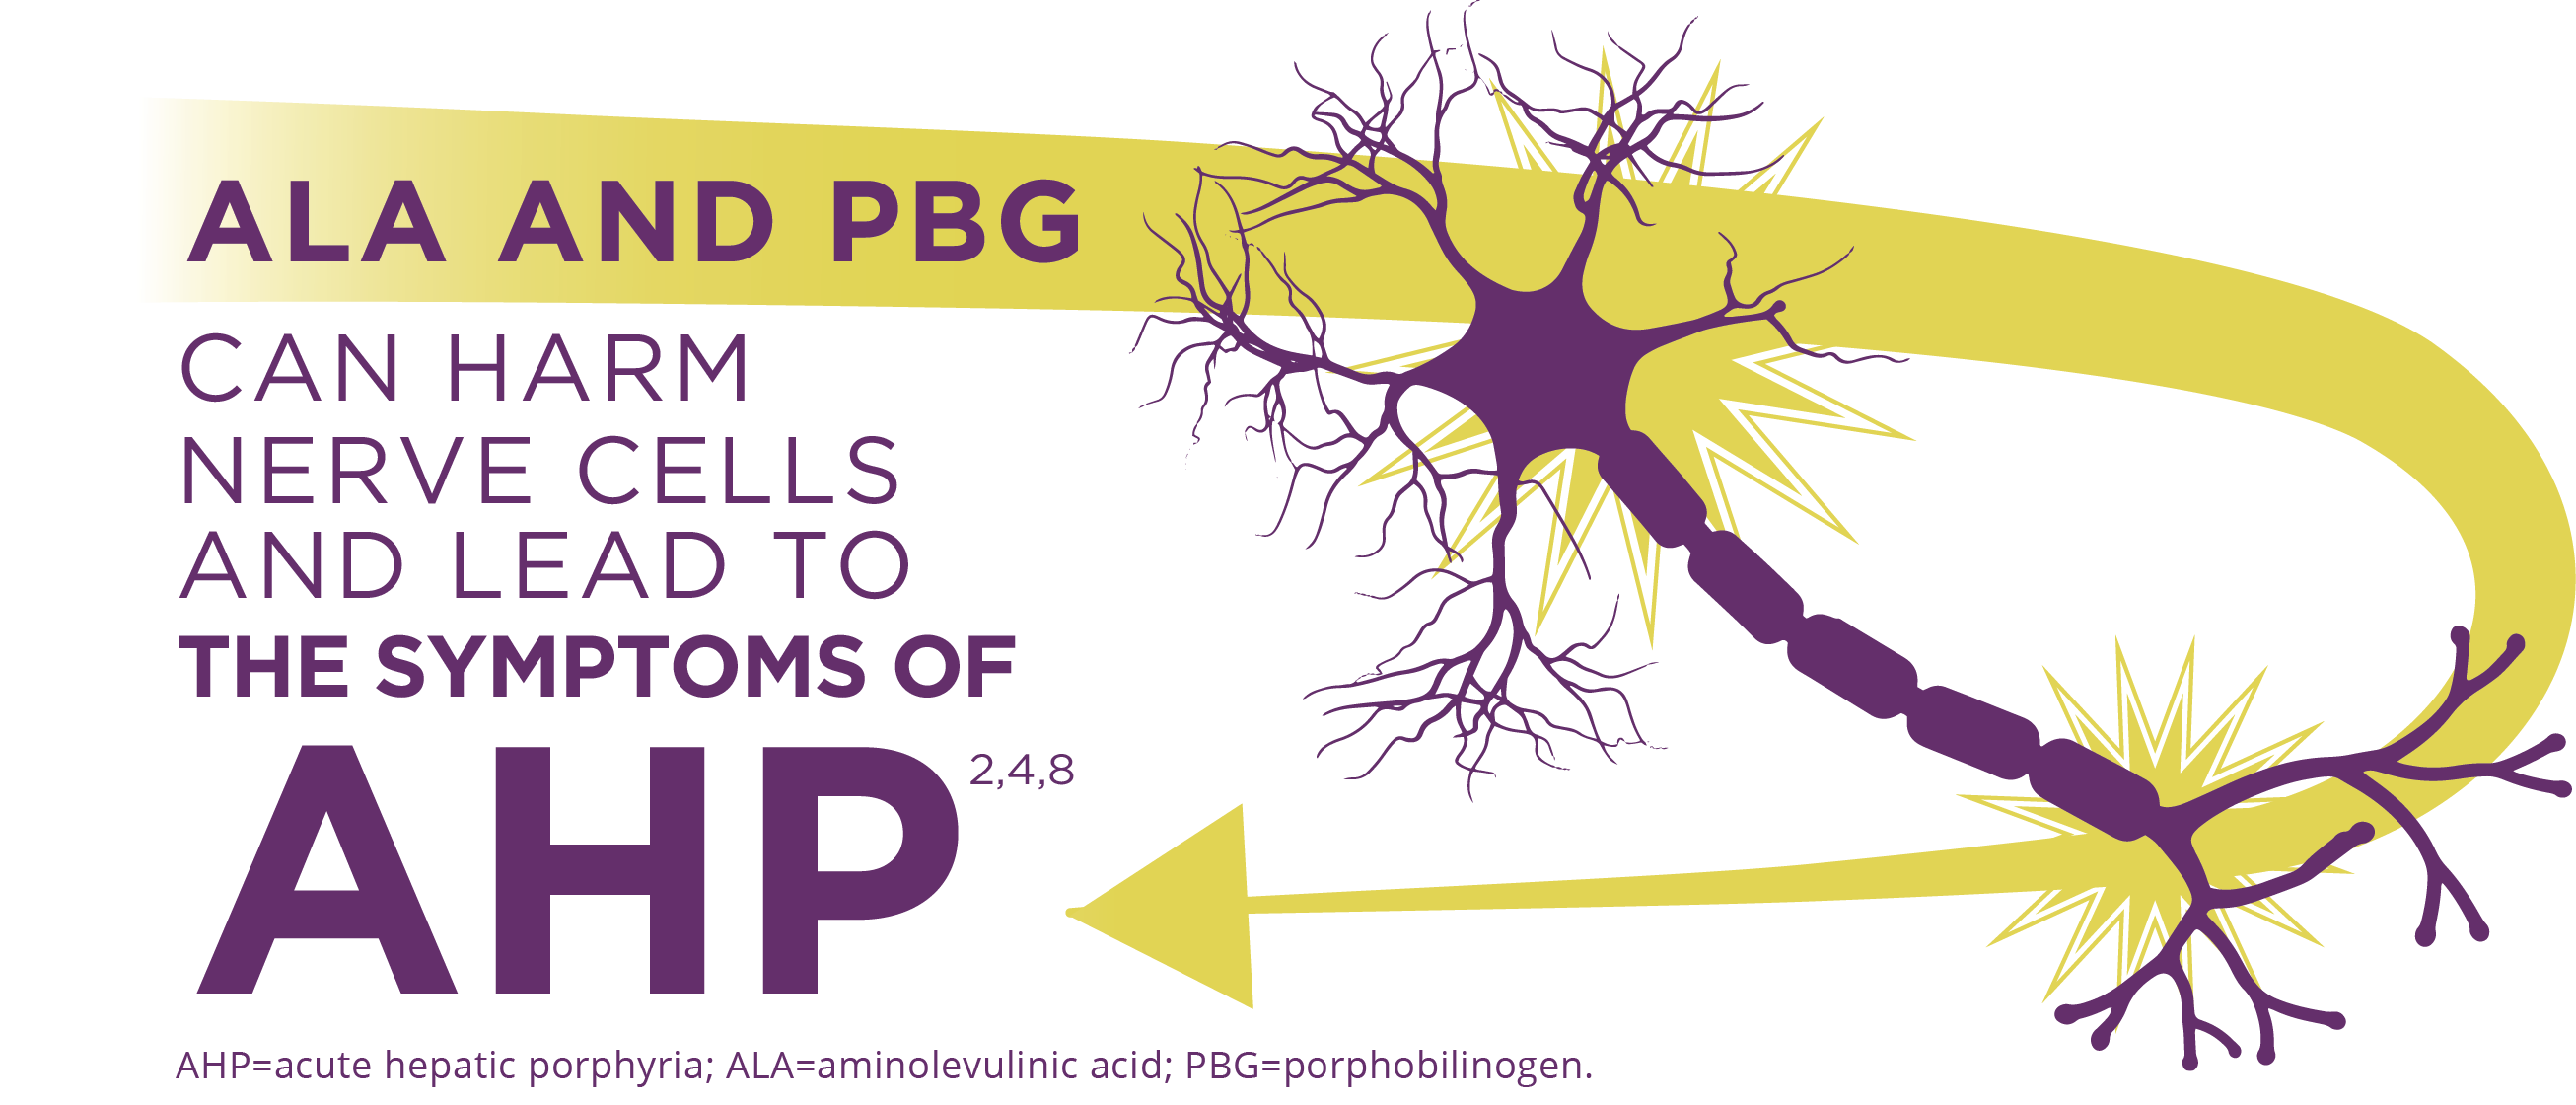 ALA and PBG can harm nerve cells and lead to the symptoms of AHP